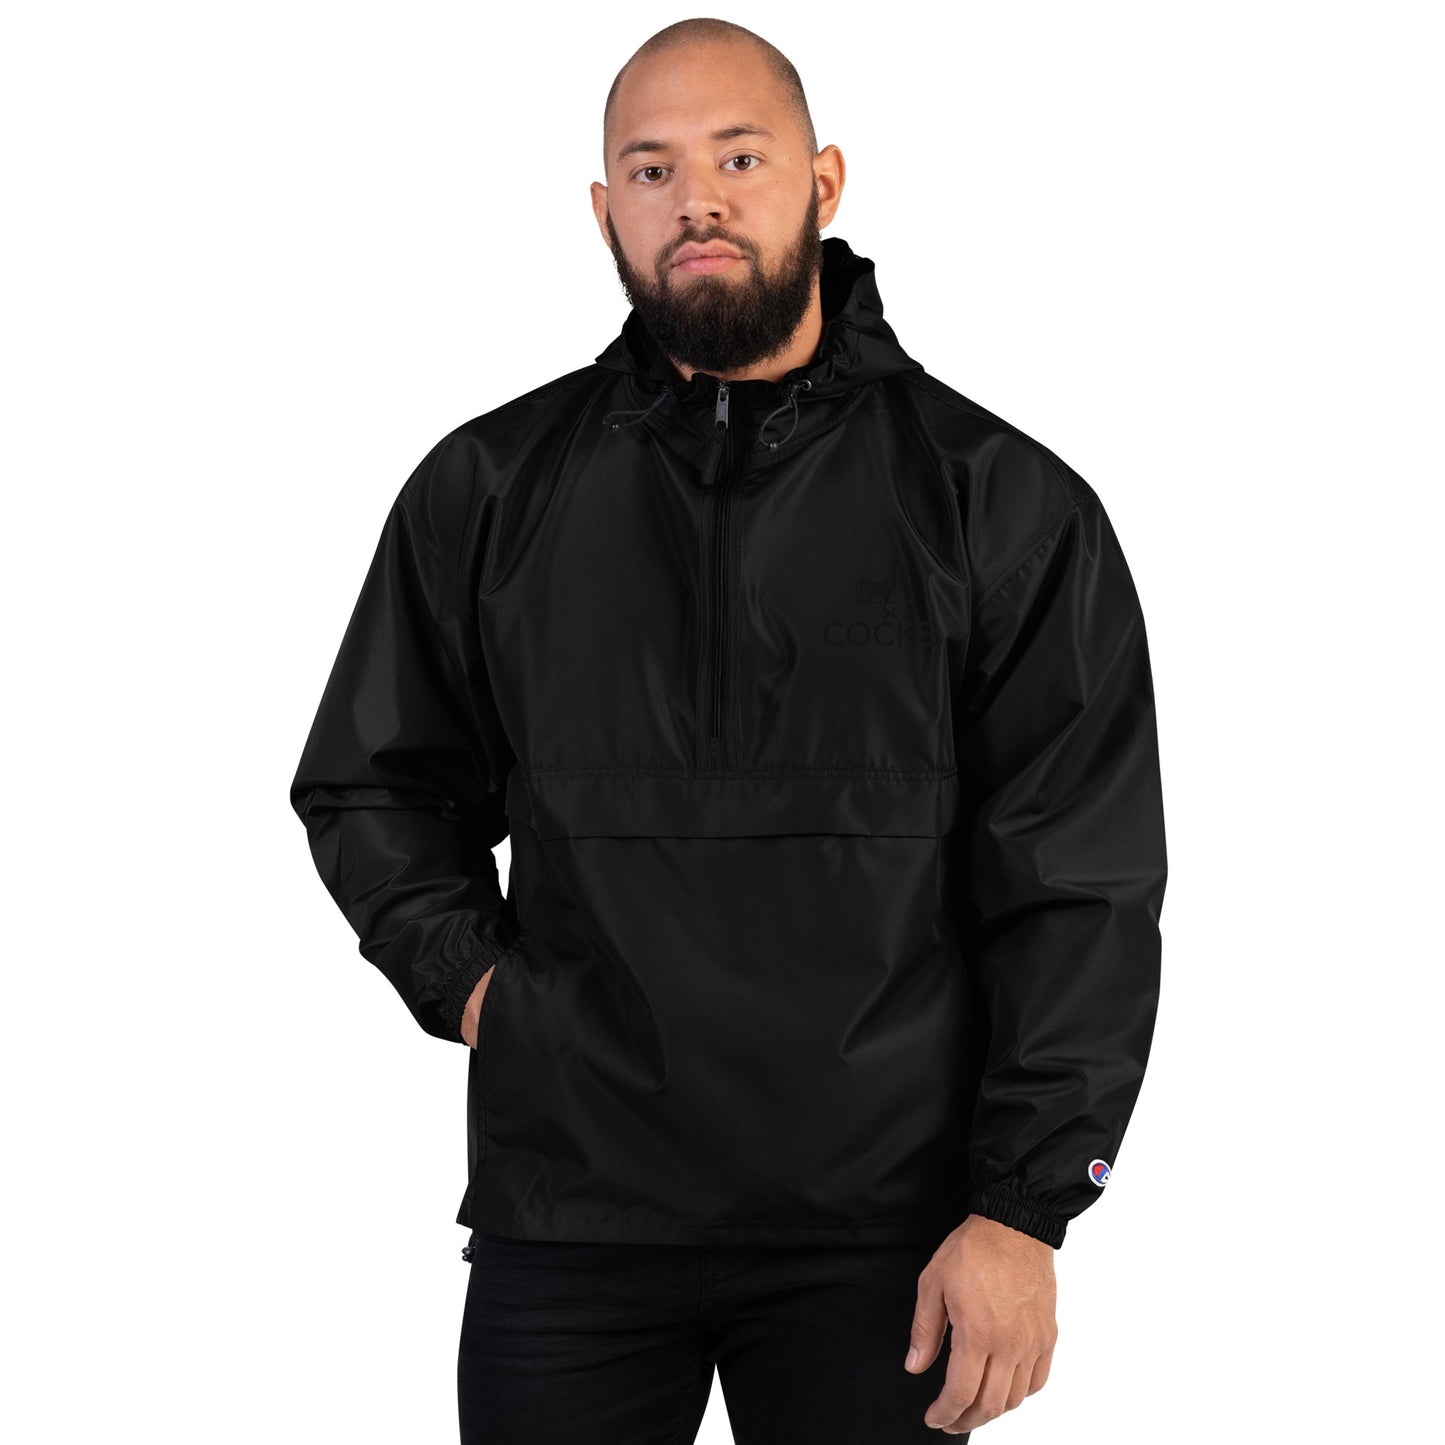 Cocks Champion All-Weather Jacket